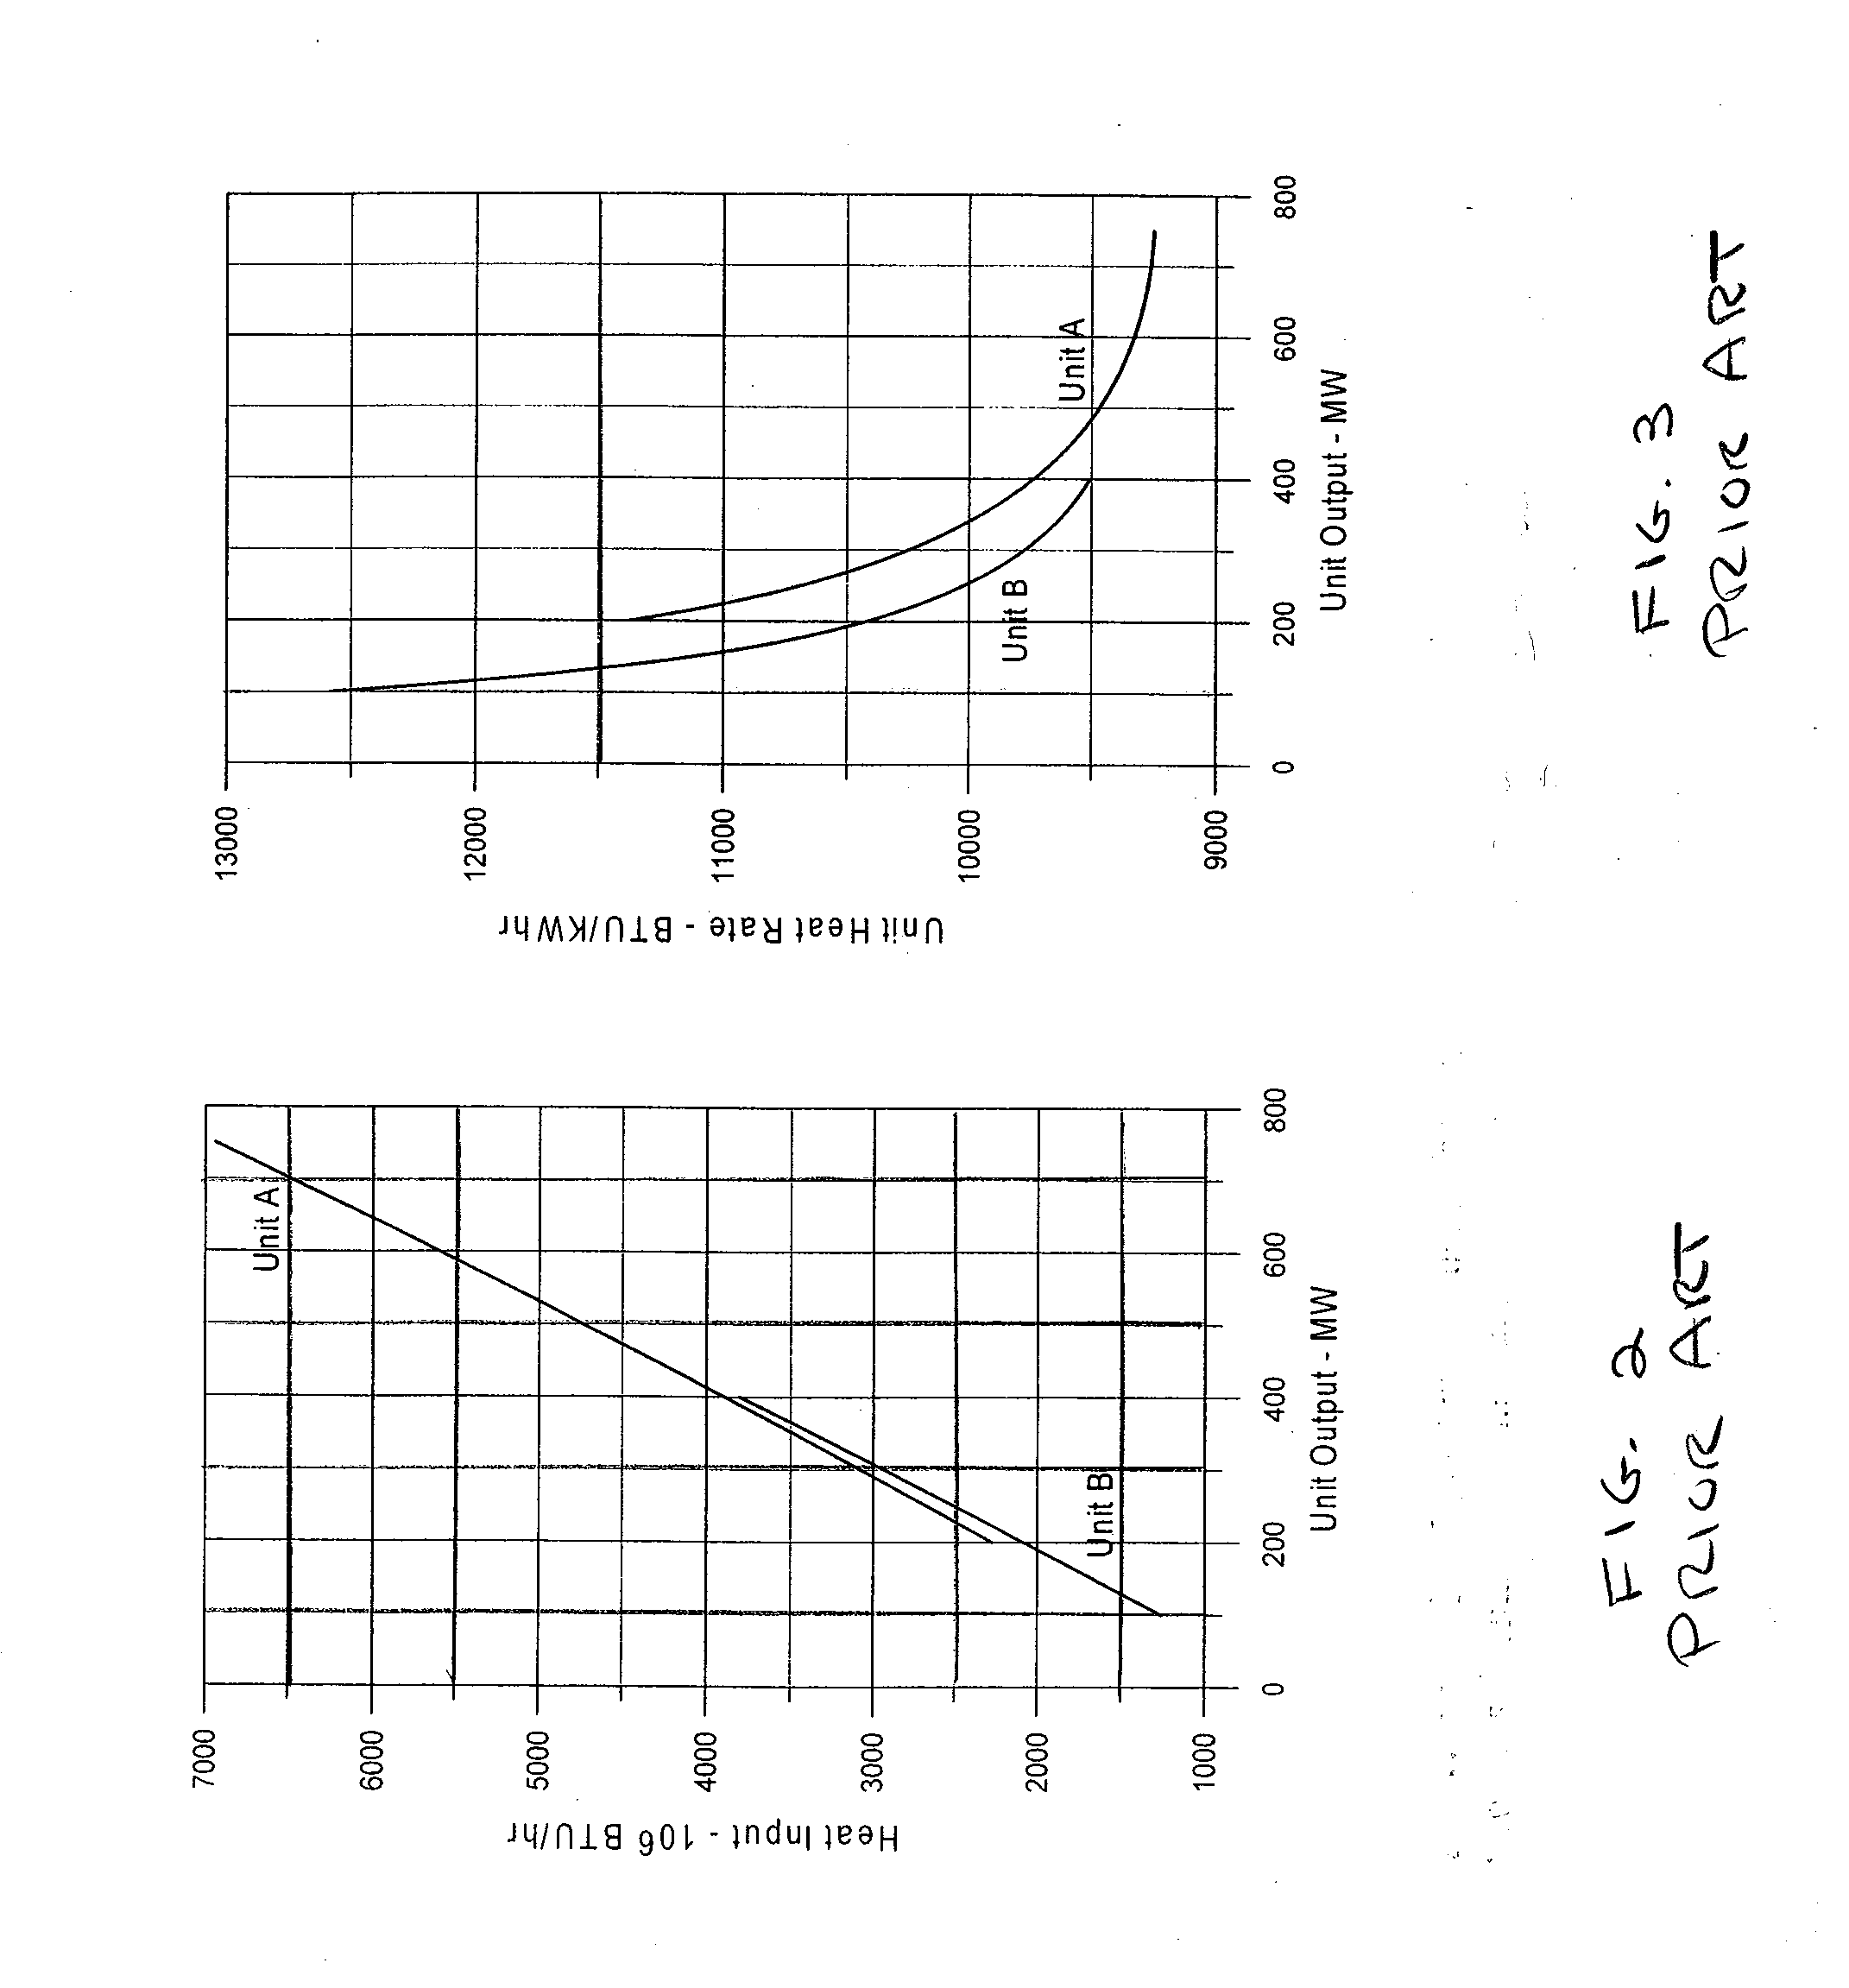 Systems and Methods For Calculating And Predicting Near Term Production Cost, Incremental Heat Rate, Capacity and Emissions Of Electric Generation Power Plants Based On Current Operating and, Optionally, Atmospheric Conditions